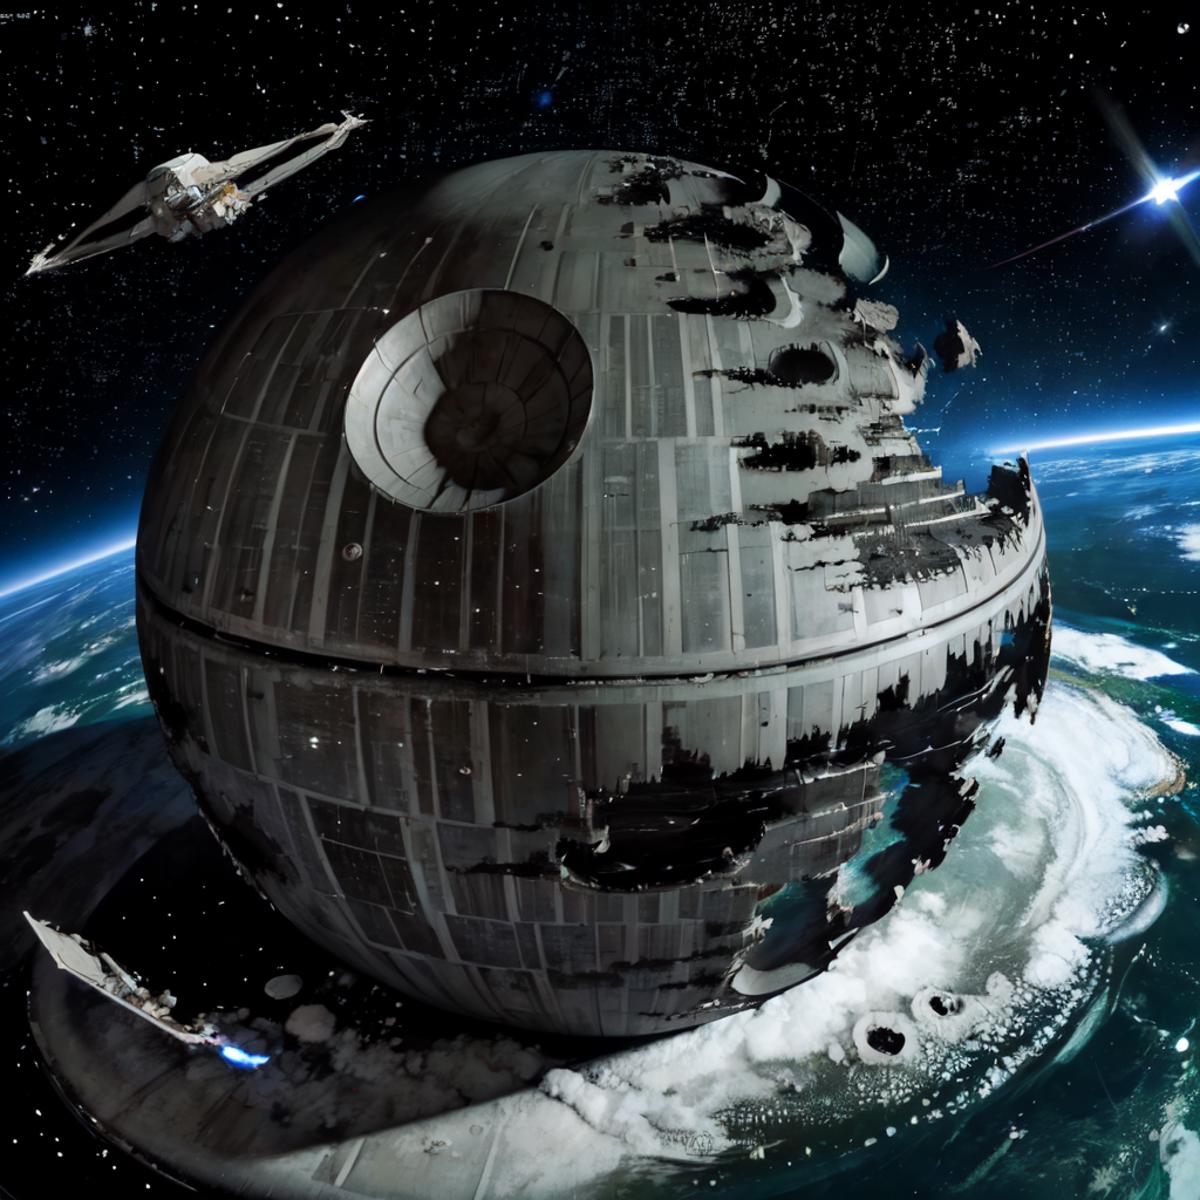 Death Star | Architecture LoRA | Cabal Collab image by FallenIncursio